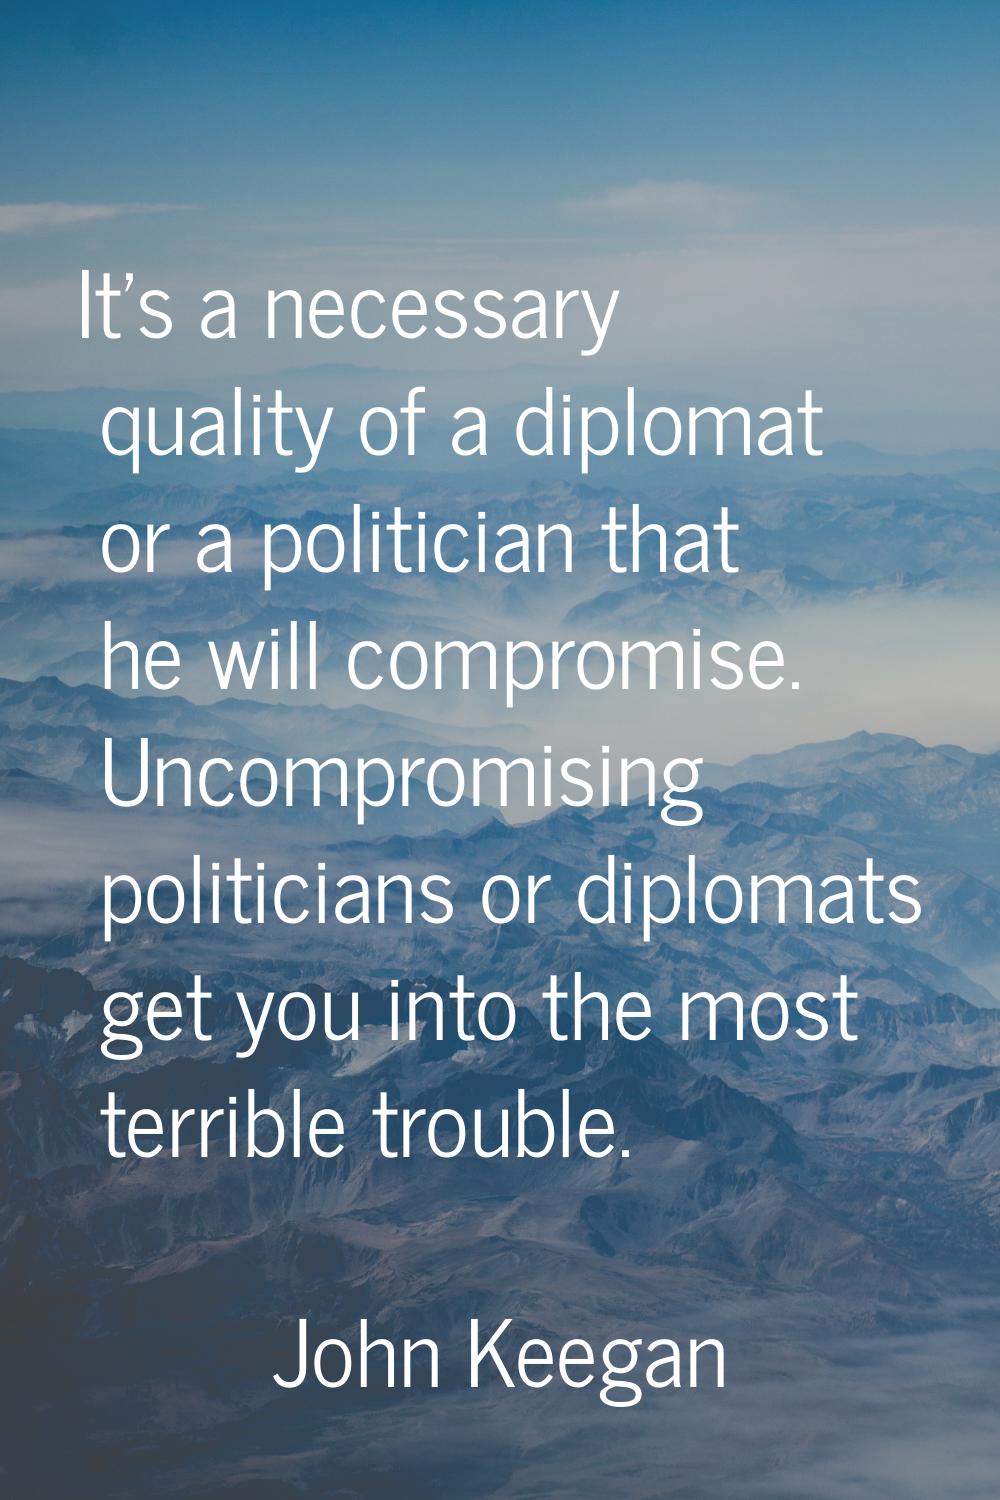 It's a necessary quality of a diplomat or a politician that he will compromise. Uncompromising poli